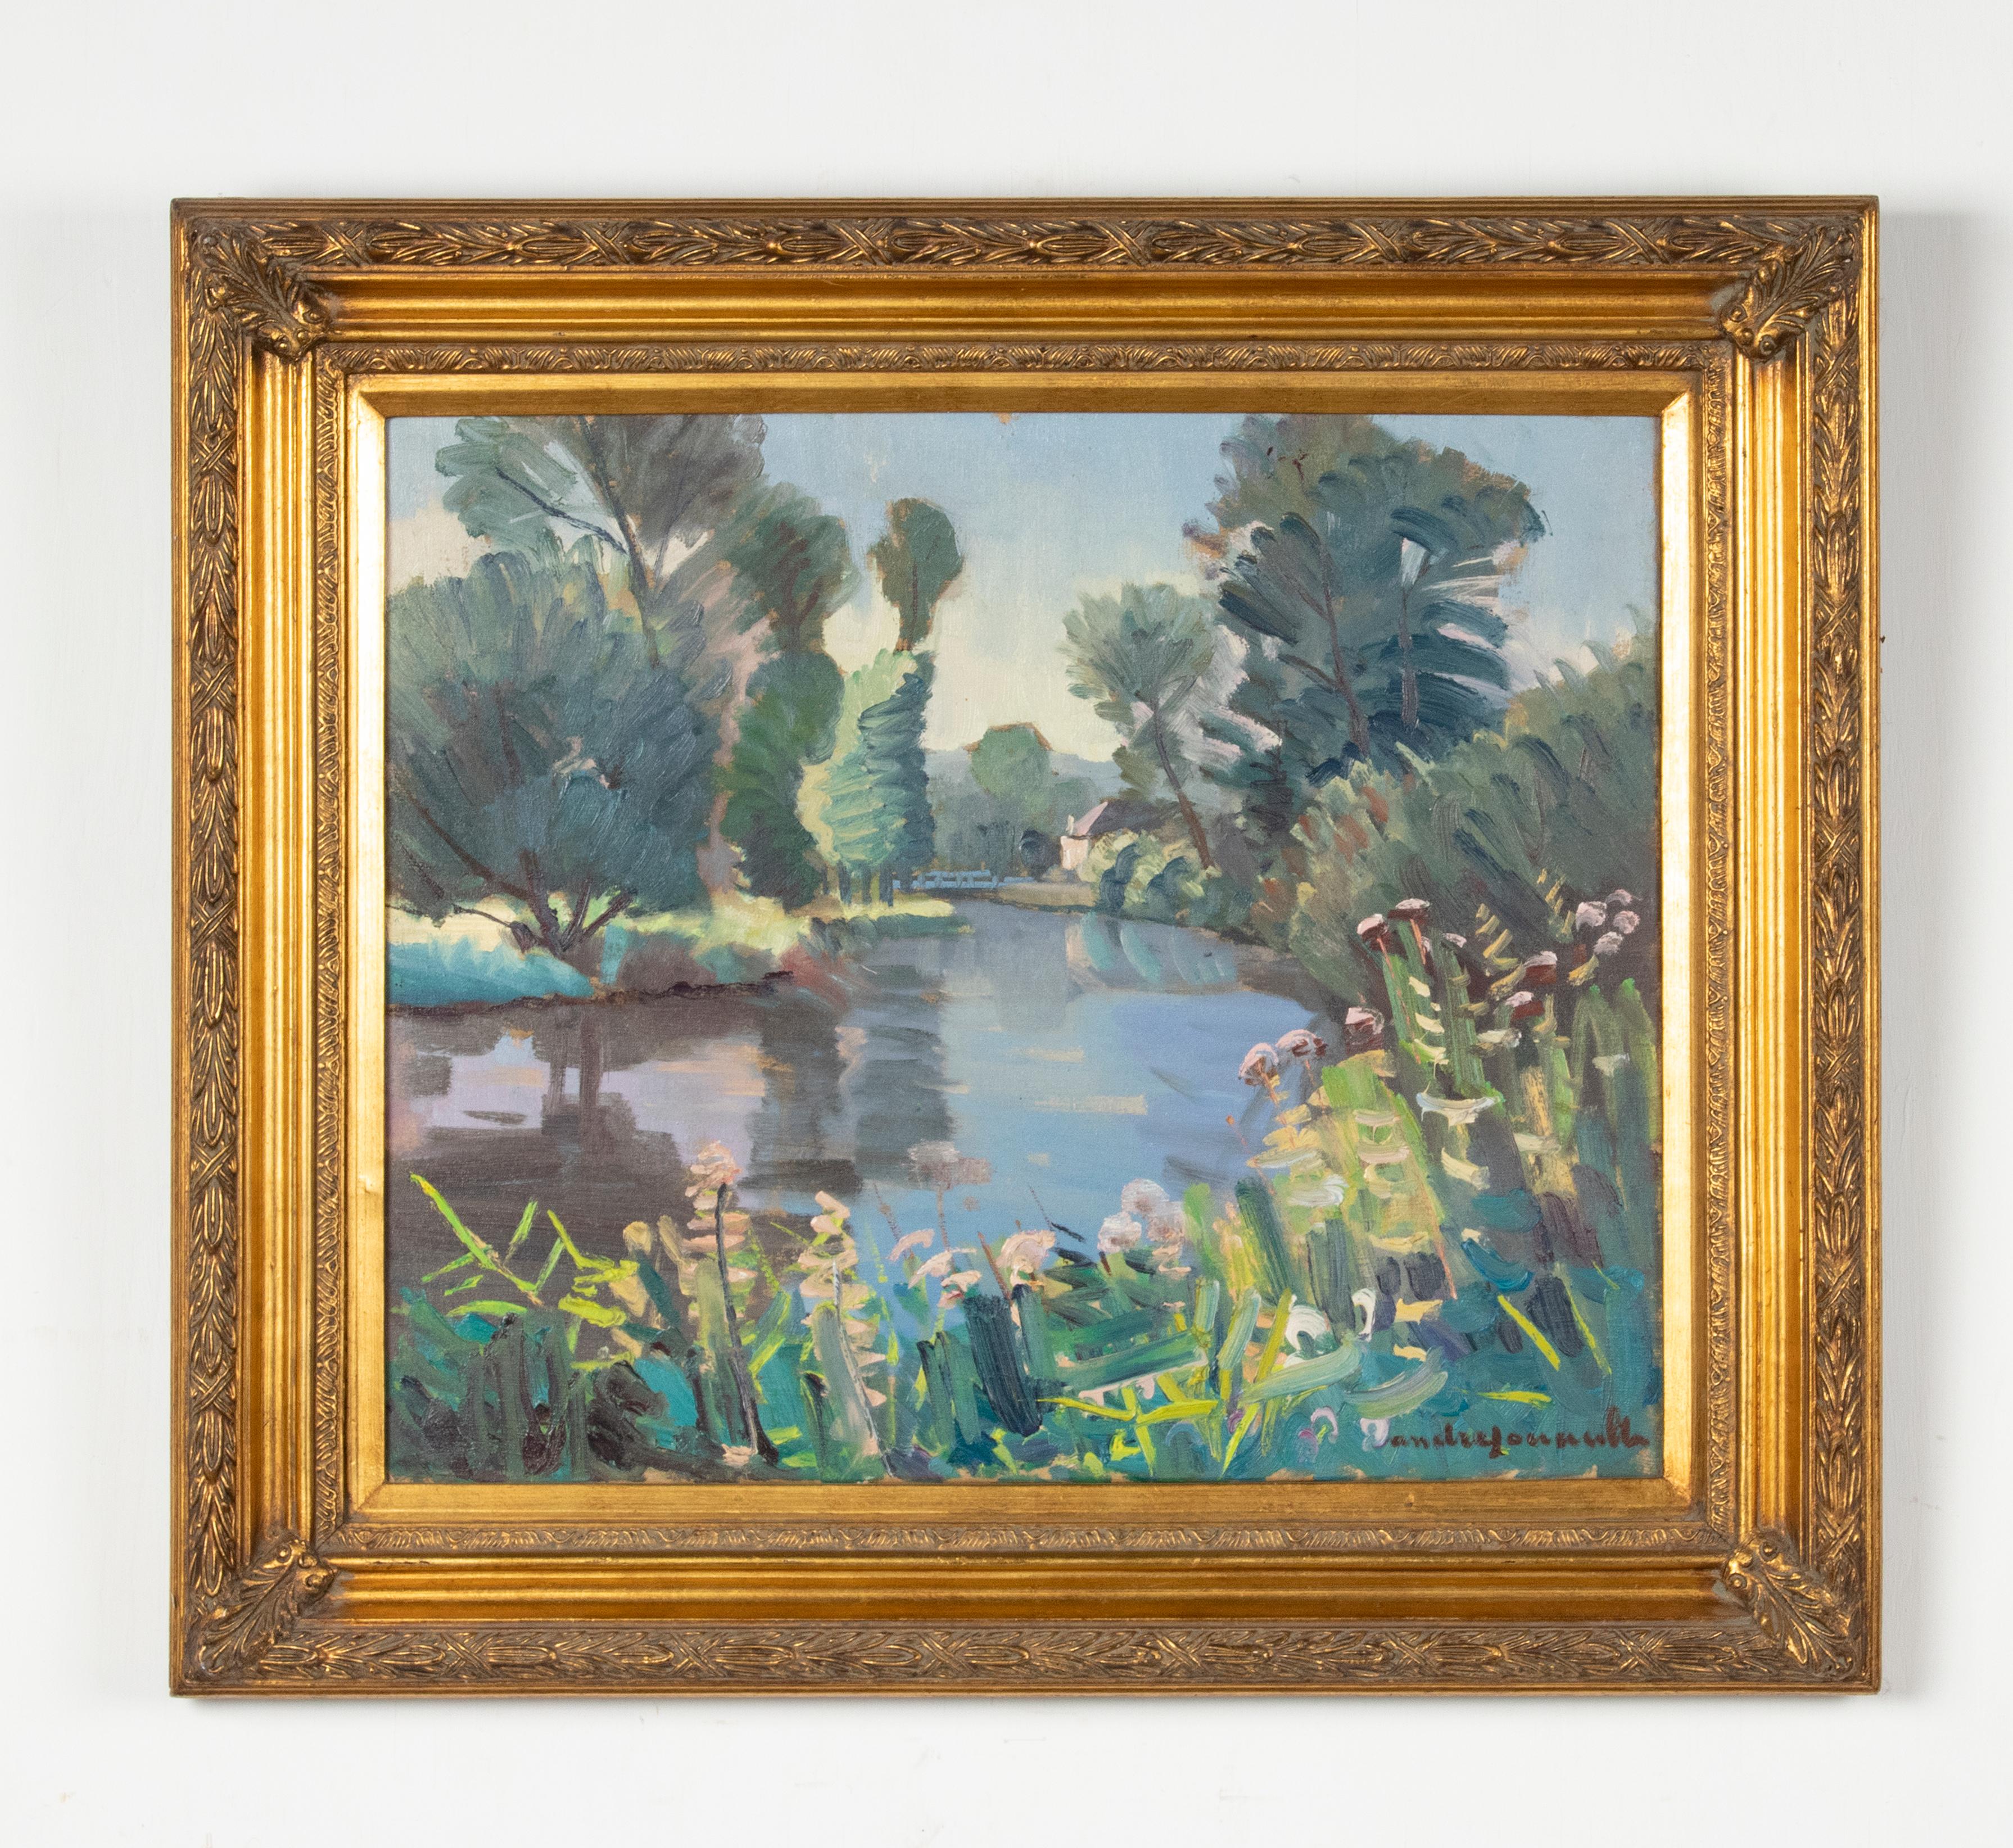 Beautiful painting, oil on canvas, of a park-like landscape. The painting has a somewhat impressionistic touch and a lively color palette. The painting is signed bottom right 'Andre Jouault'. The painting is framed in a beautiful gold-coloured